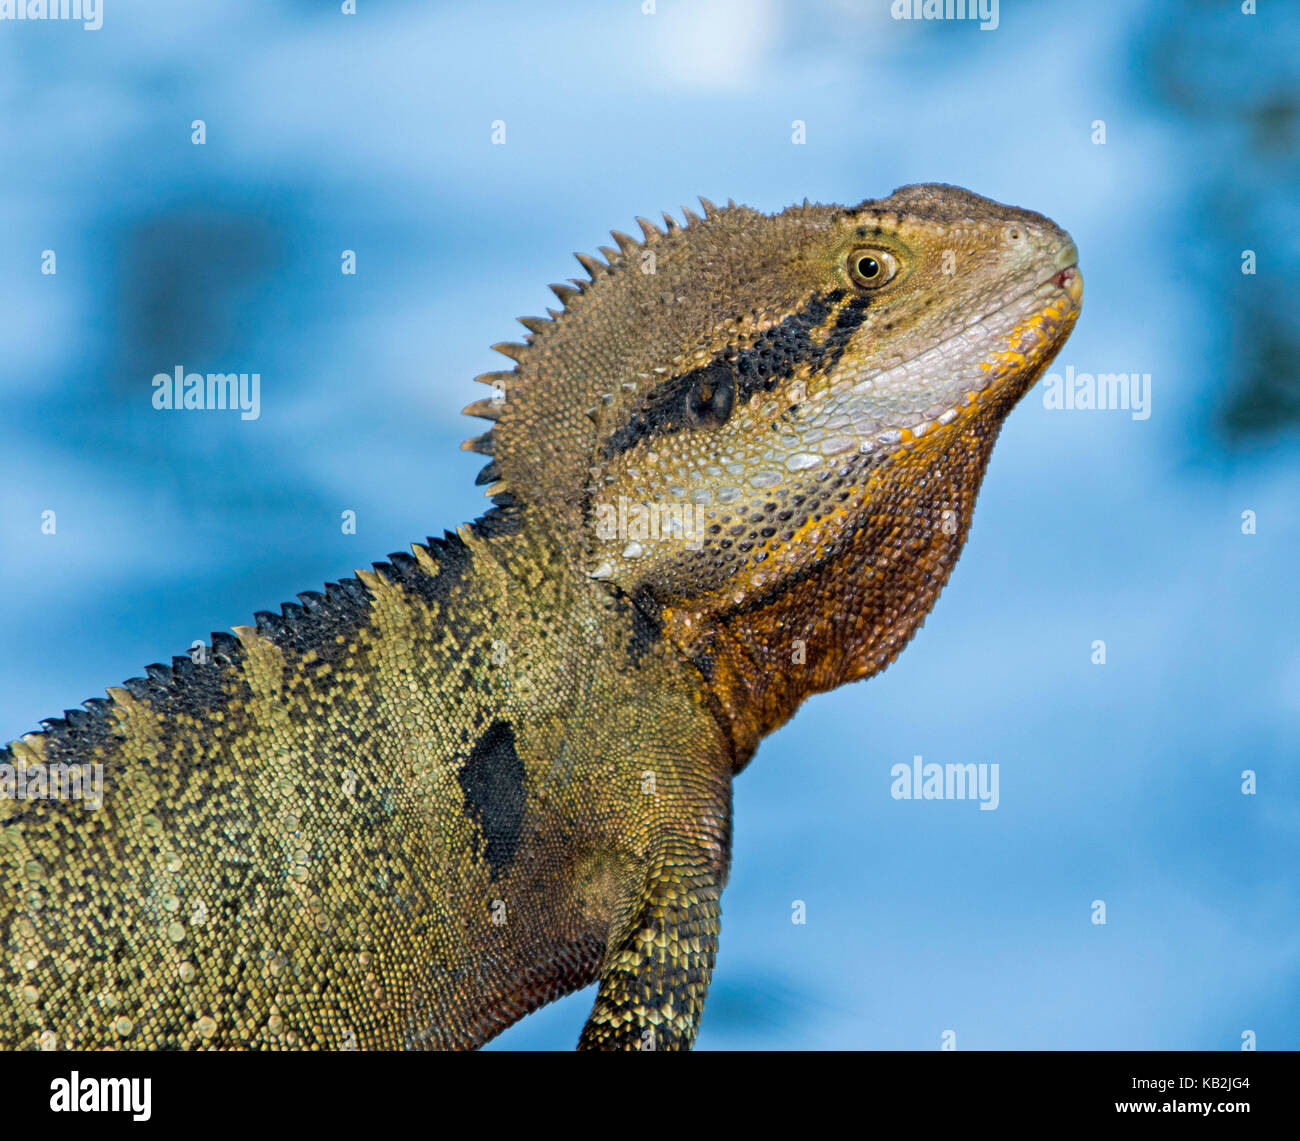 Head of Australian eastern water dragon lizard, Intellegama lesueurii syn Physignathus, with alert expression, against blue background Stock Photo